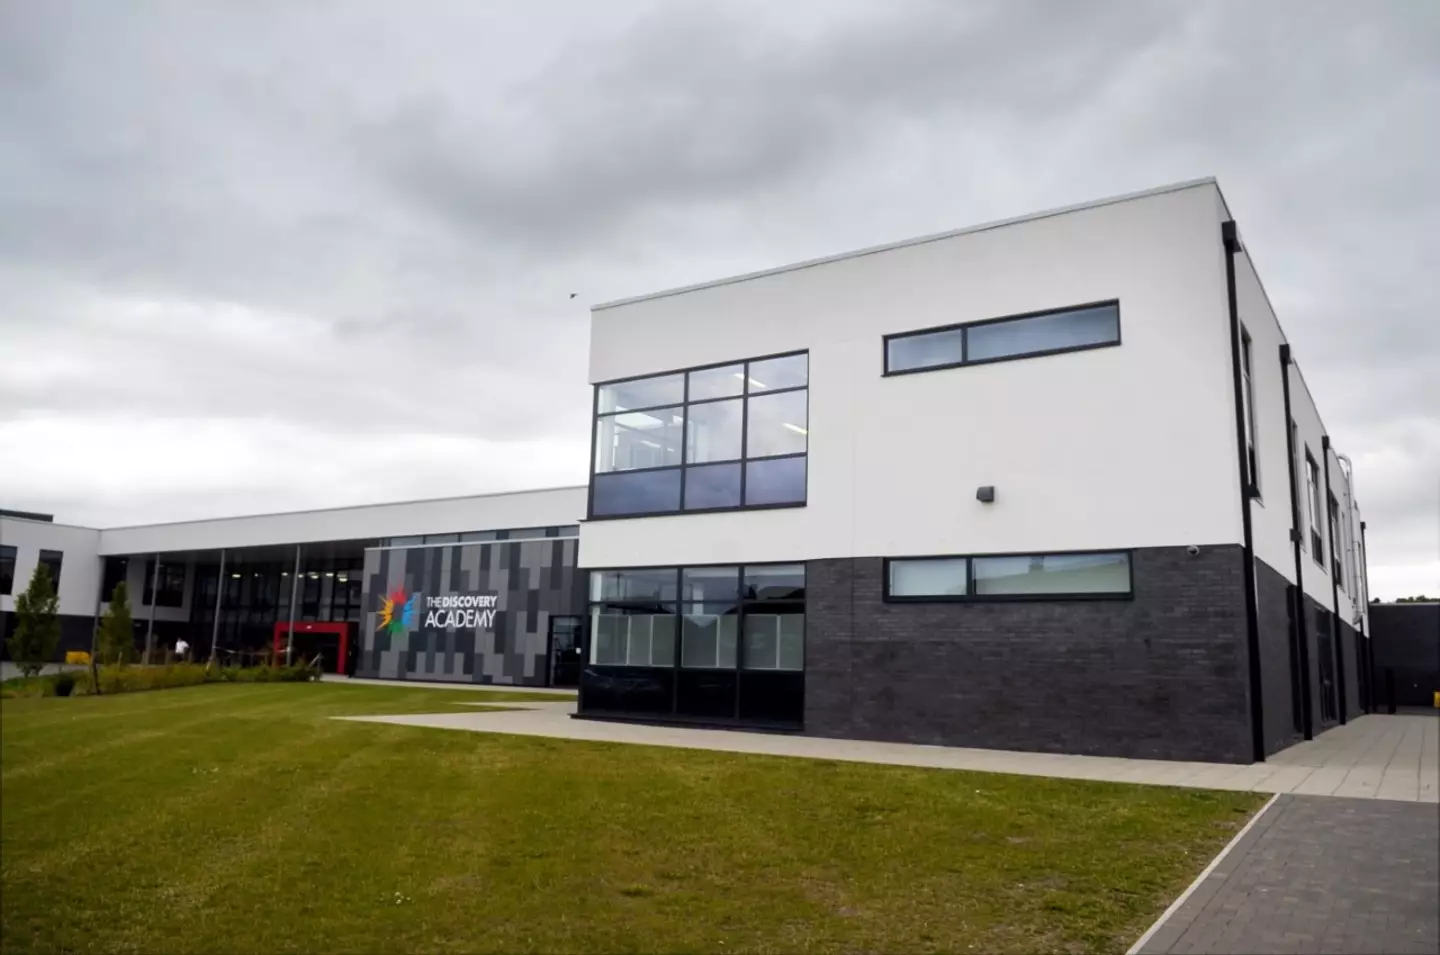 The Discovery Academy in Bentilee, Stoke-on-Trent, has attracted the ire of parents and kids.